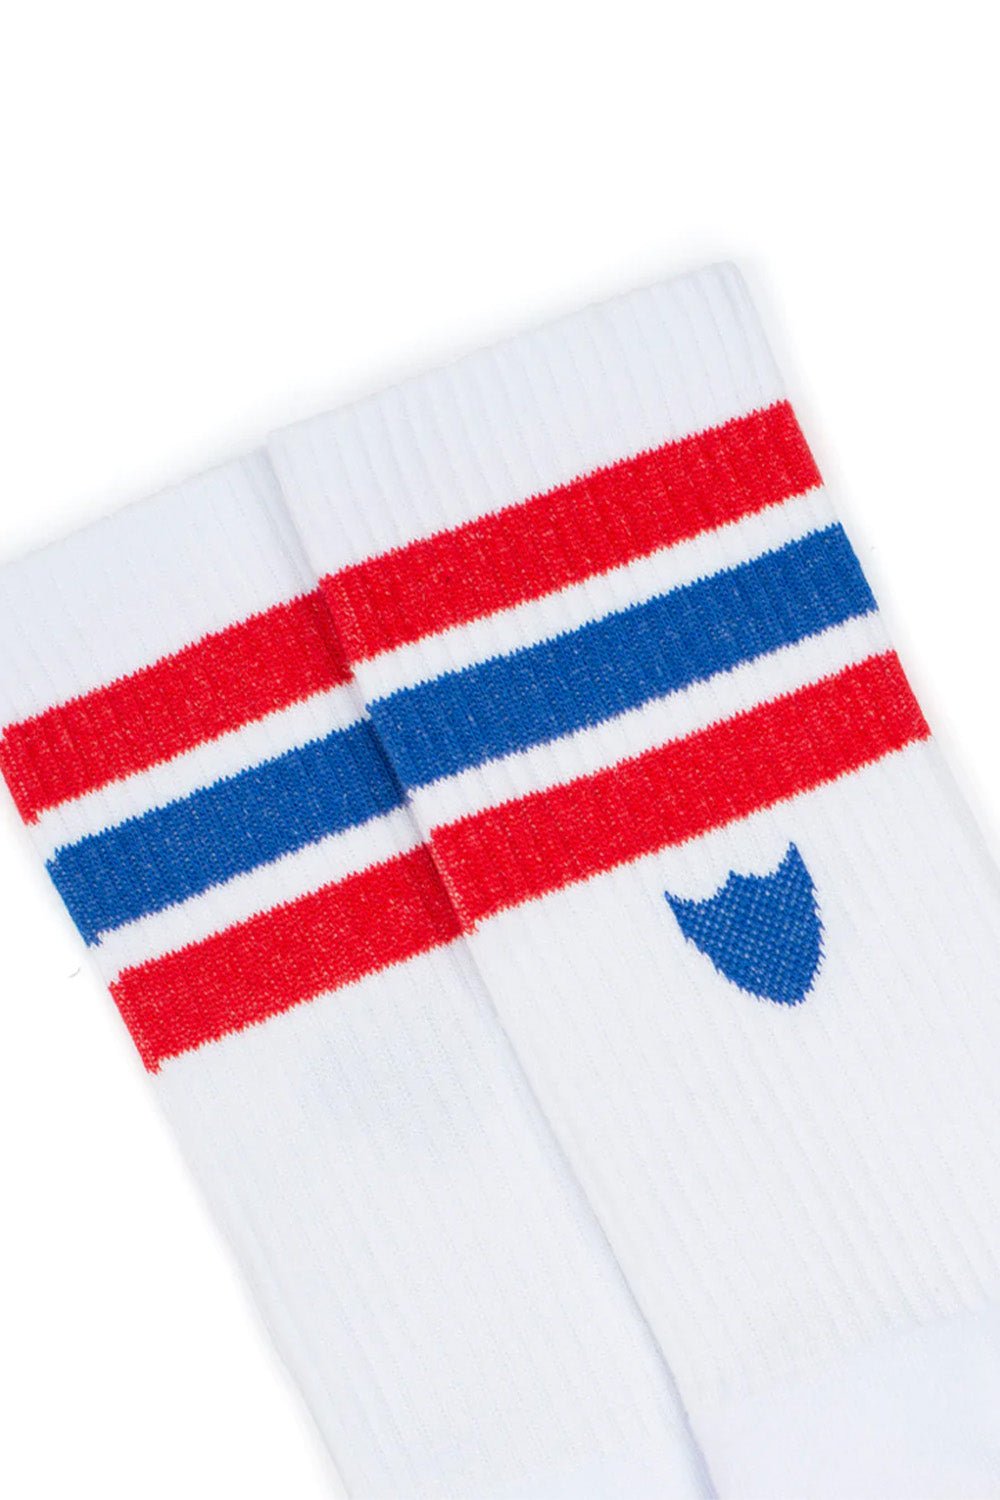 SHIELD FLAG WOMAN SOCKS Signature woman socks with Hollywood Trading Co script logo. 85% Cotton 10% Polyamide 5% Elastane. Made in Italy HTC LOS ANGELES